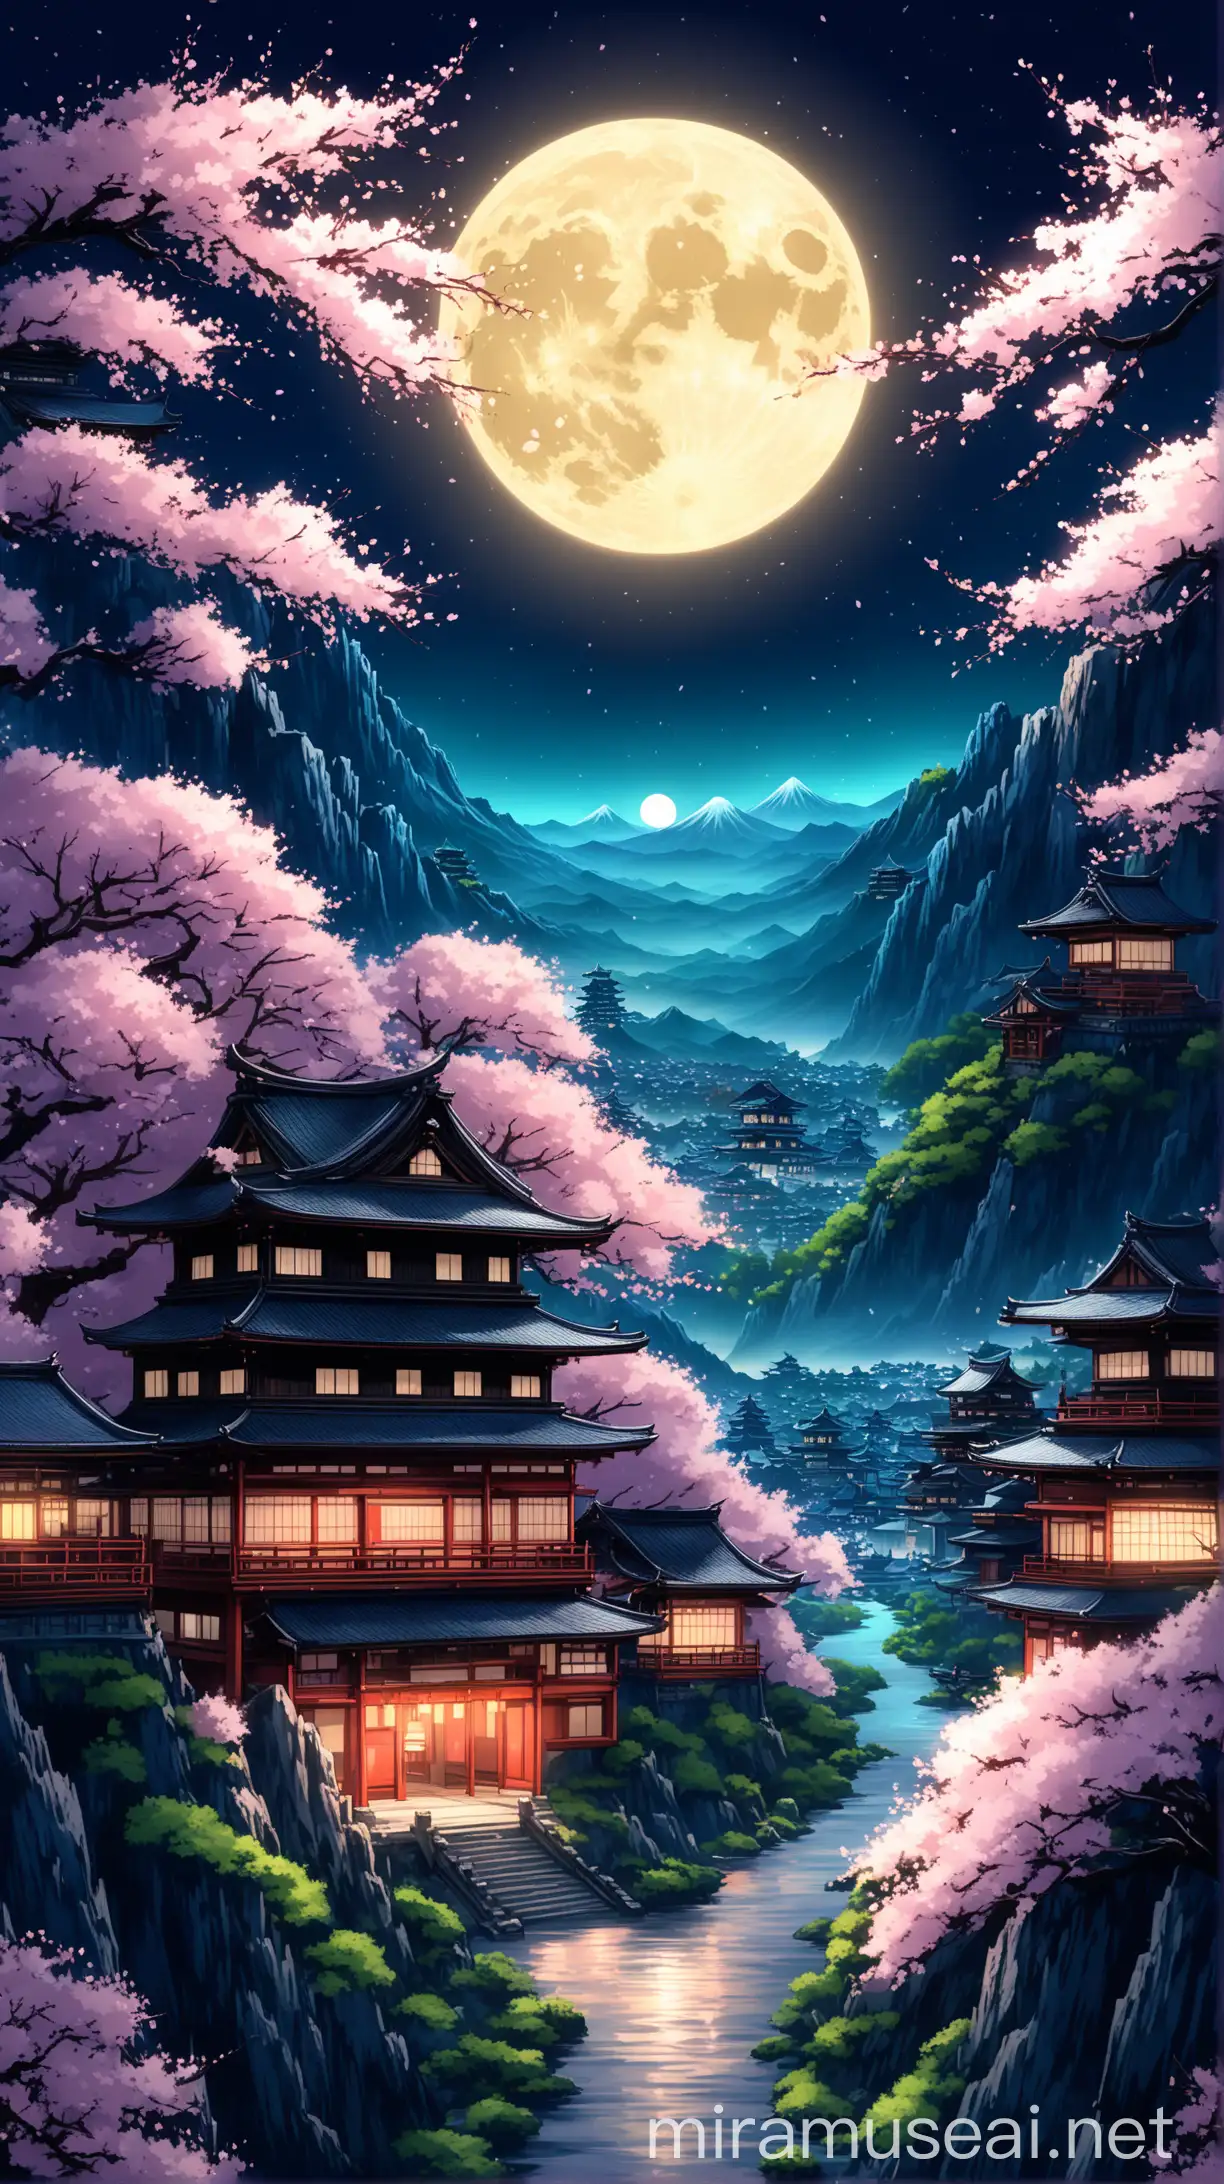 Under the radiant glow of a full moon, Japanese fantasy landscape captivates with its mysterious allure. Traditional architecture and cherry blossoms stand in harmony against the backdrop of towering mountains, creating an enchanting scene that marries the tranquil darkness with the gentle illumination of moonlight,. Anime style, wallpaper